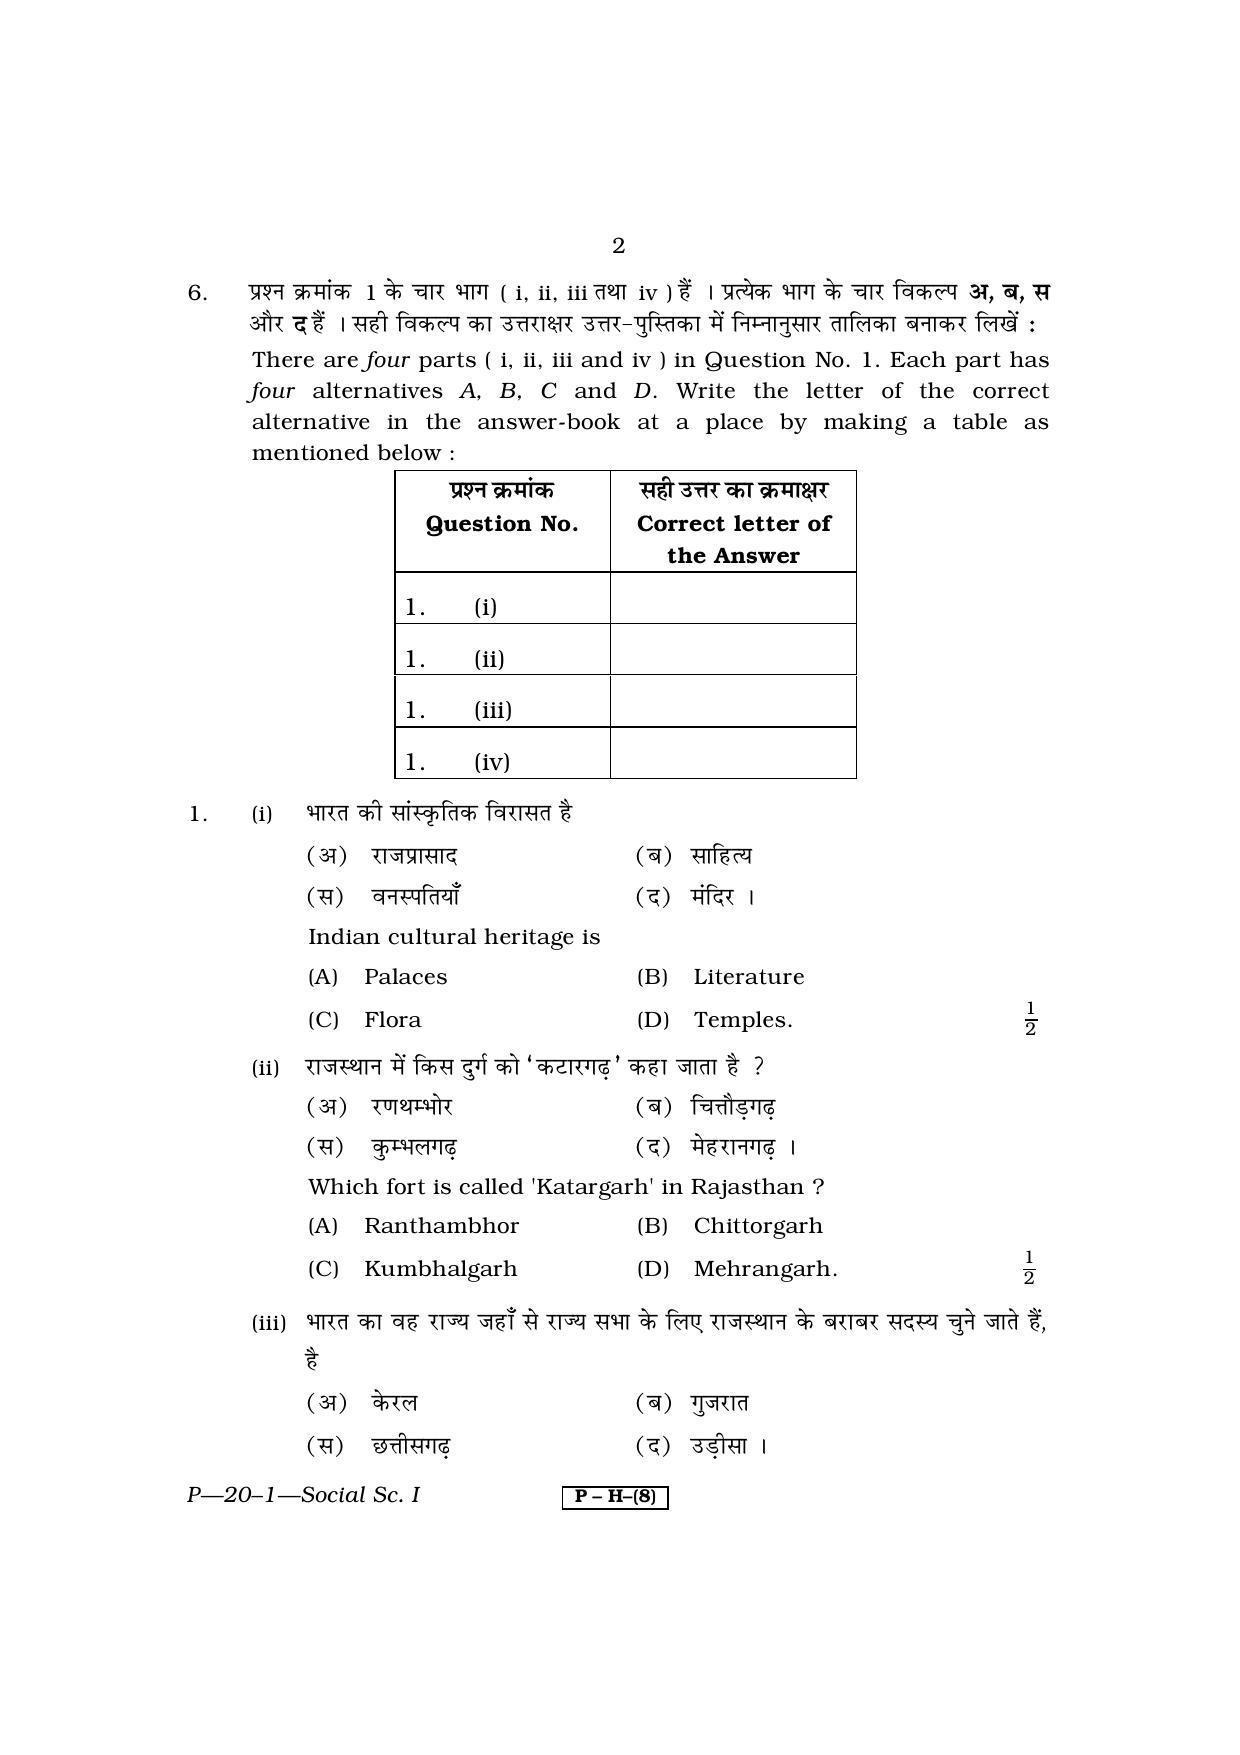 RBSE 2011 Social Science I Praveshika Question Paper - Page 2